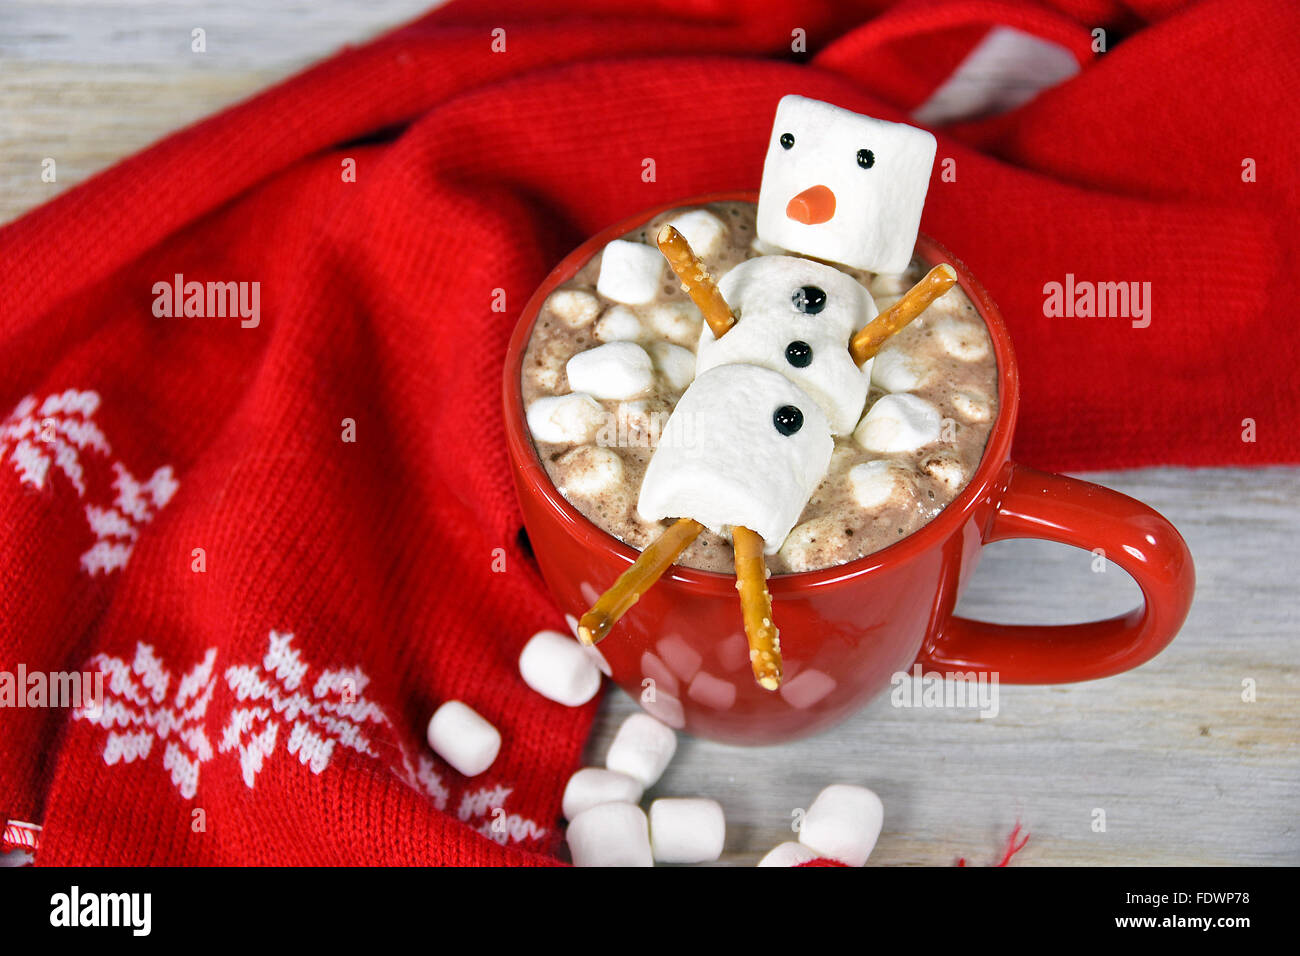 Hot chocolate drink with marshmallow snowman in red mug with red winter scarf. Stock Photo